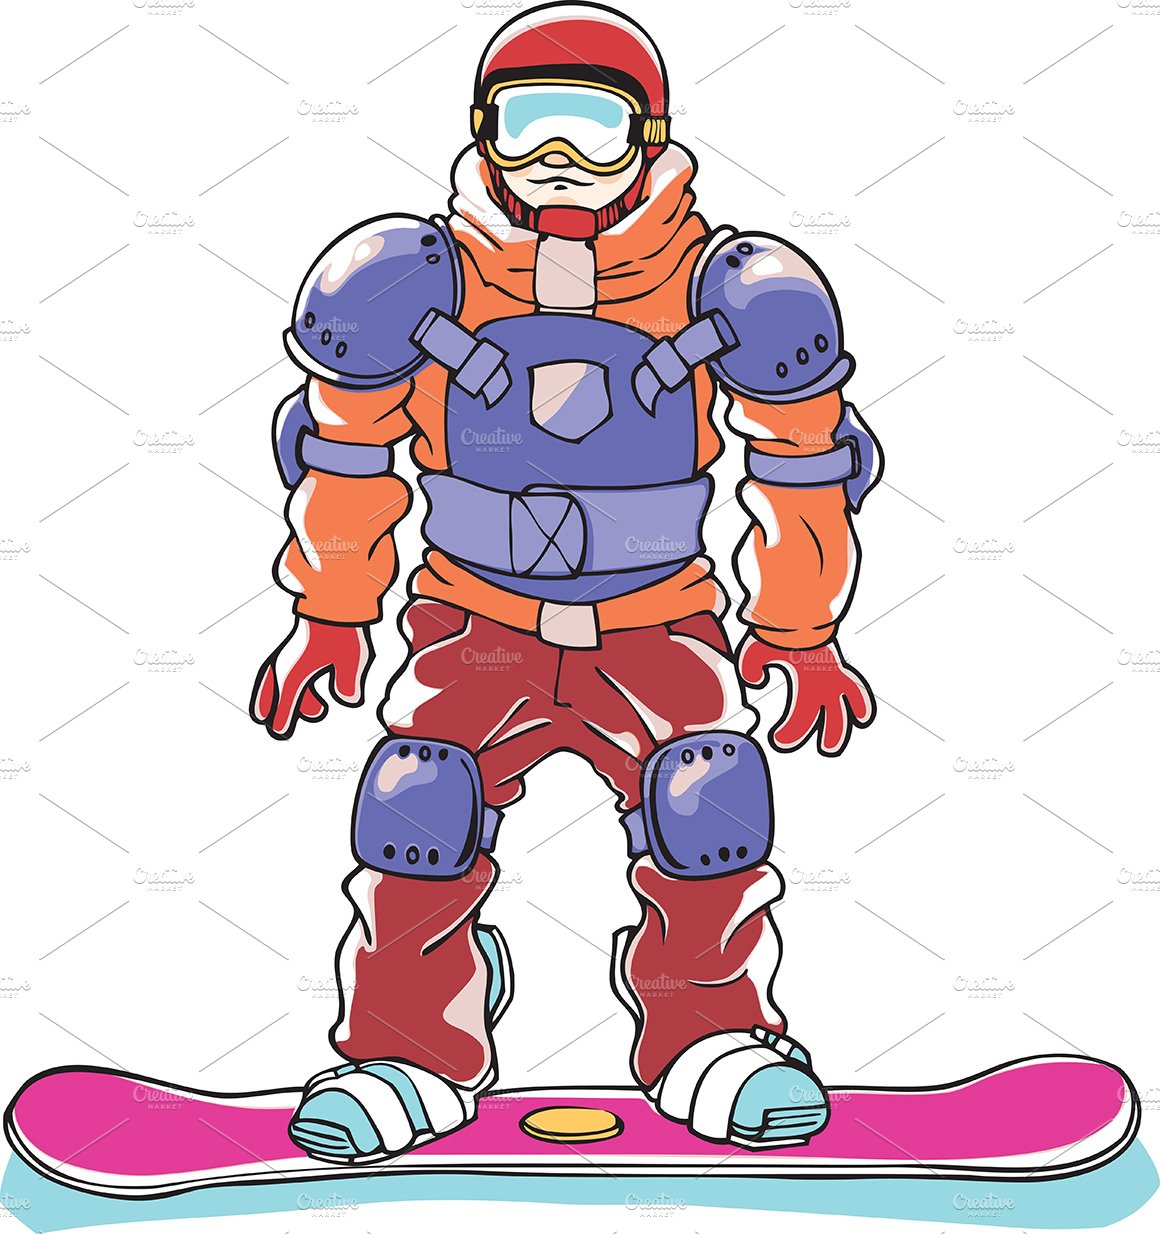 Fully Armored Snowboarder cover image.